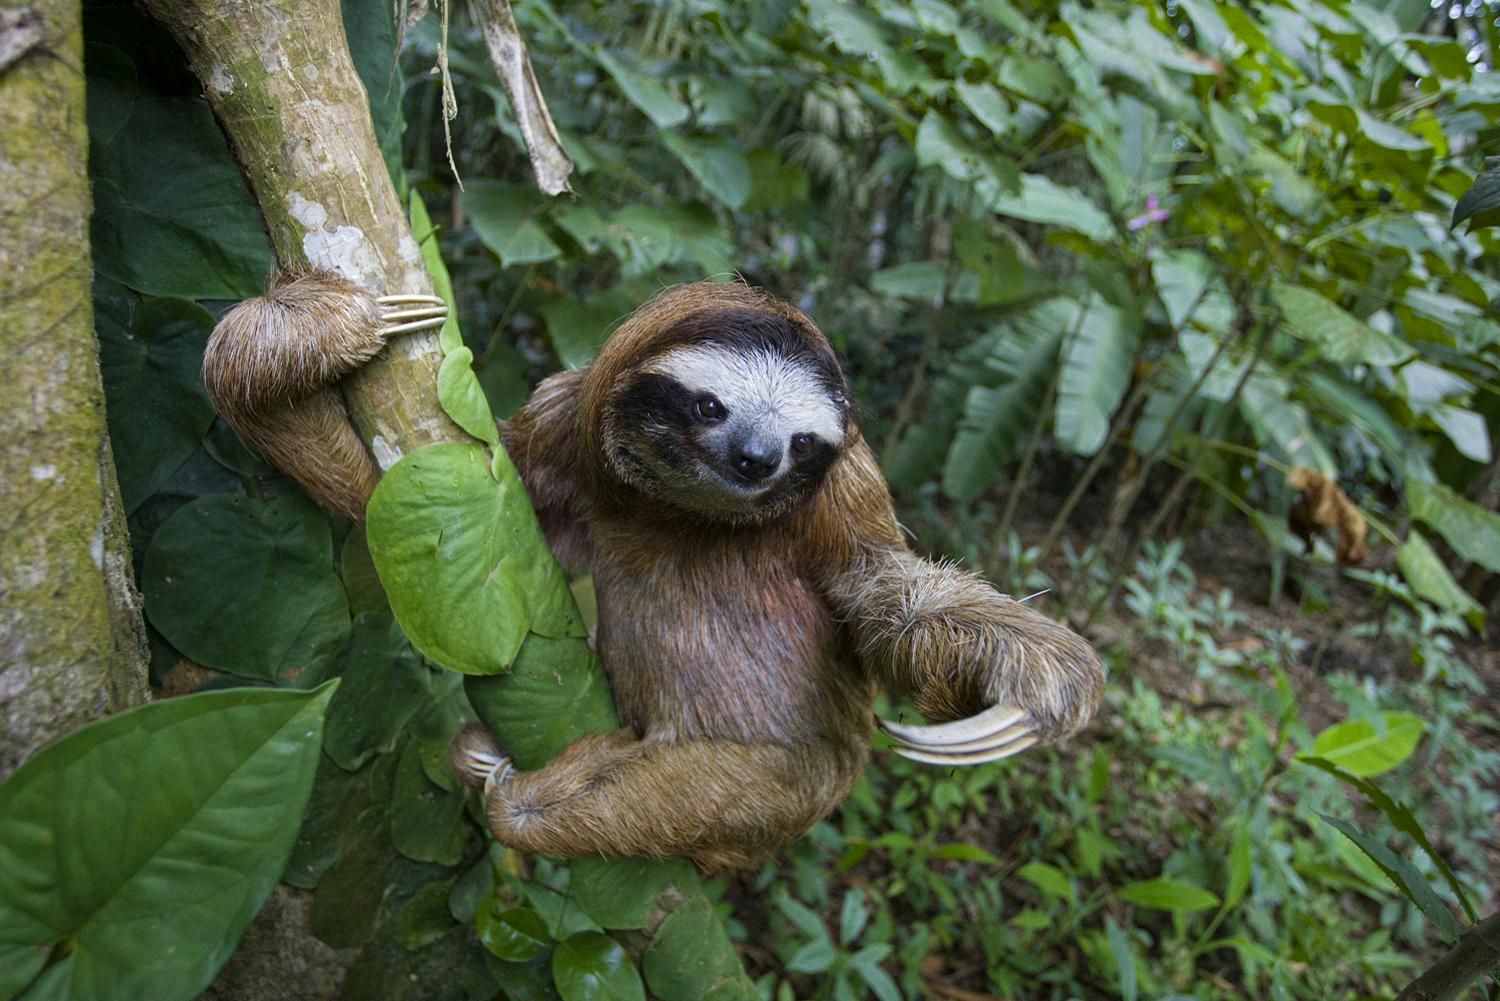 can sloths move fast